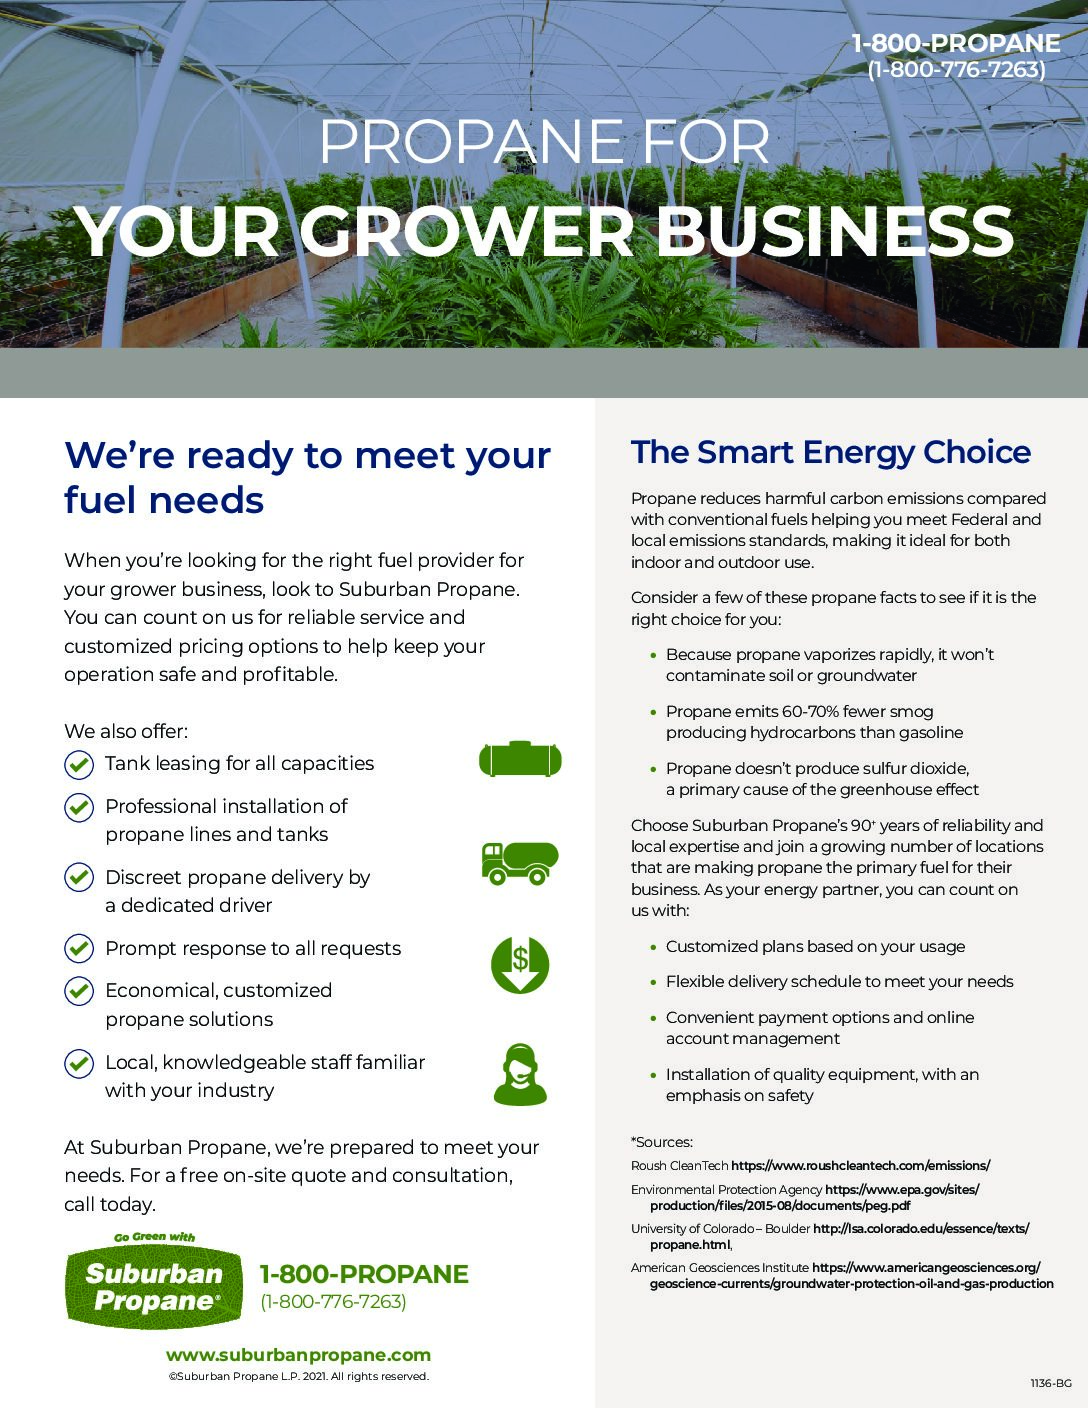 propane for your grower business PDF image